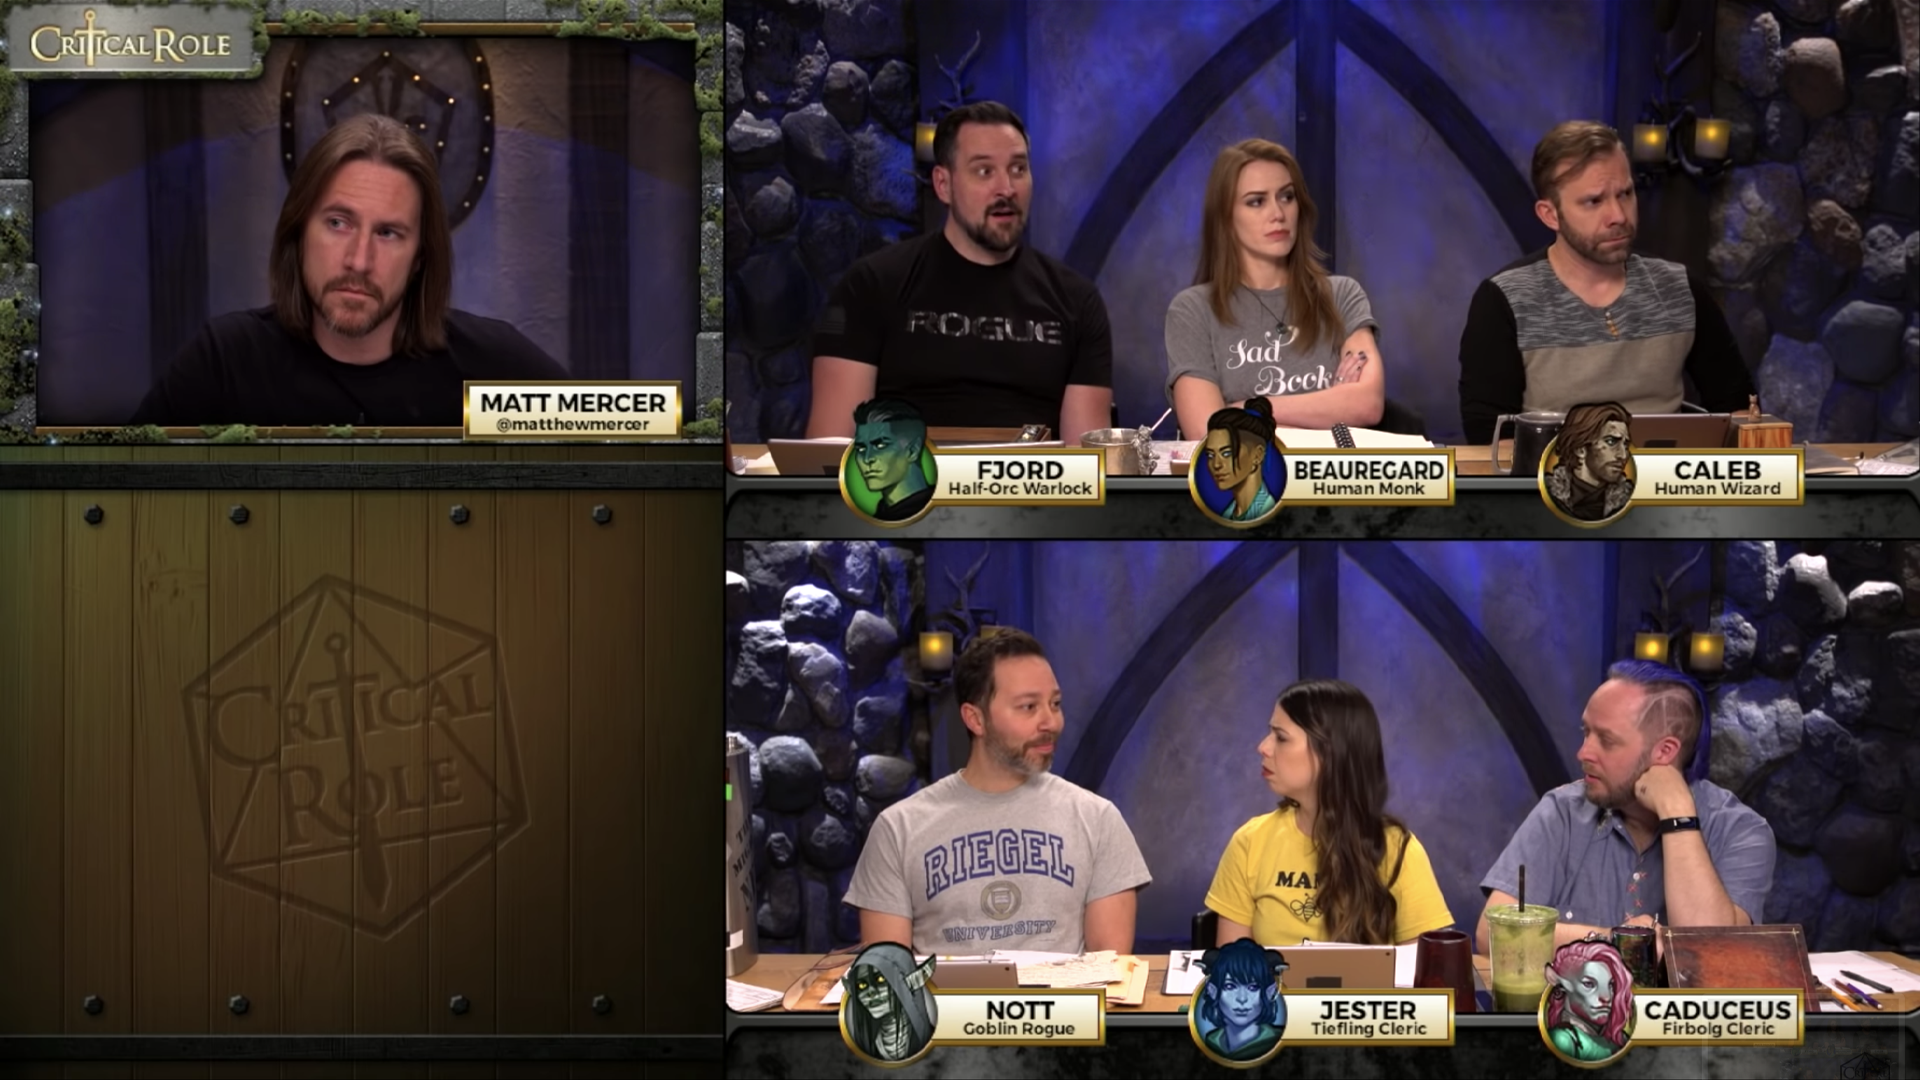 Image for Critical Role’s Campaign 2 finale shows just how far the hit Dungeons & Dragons series has come